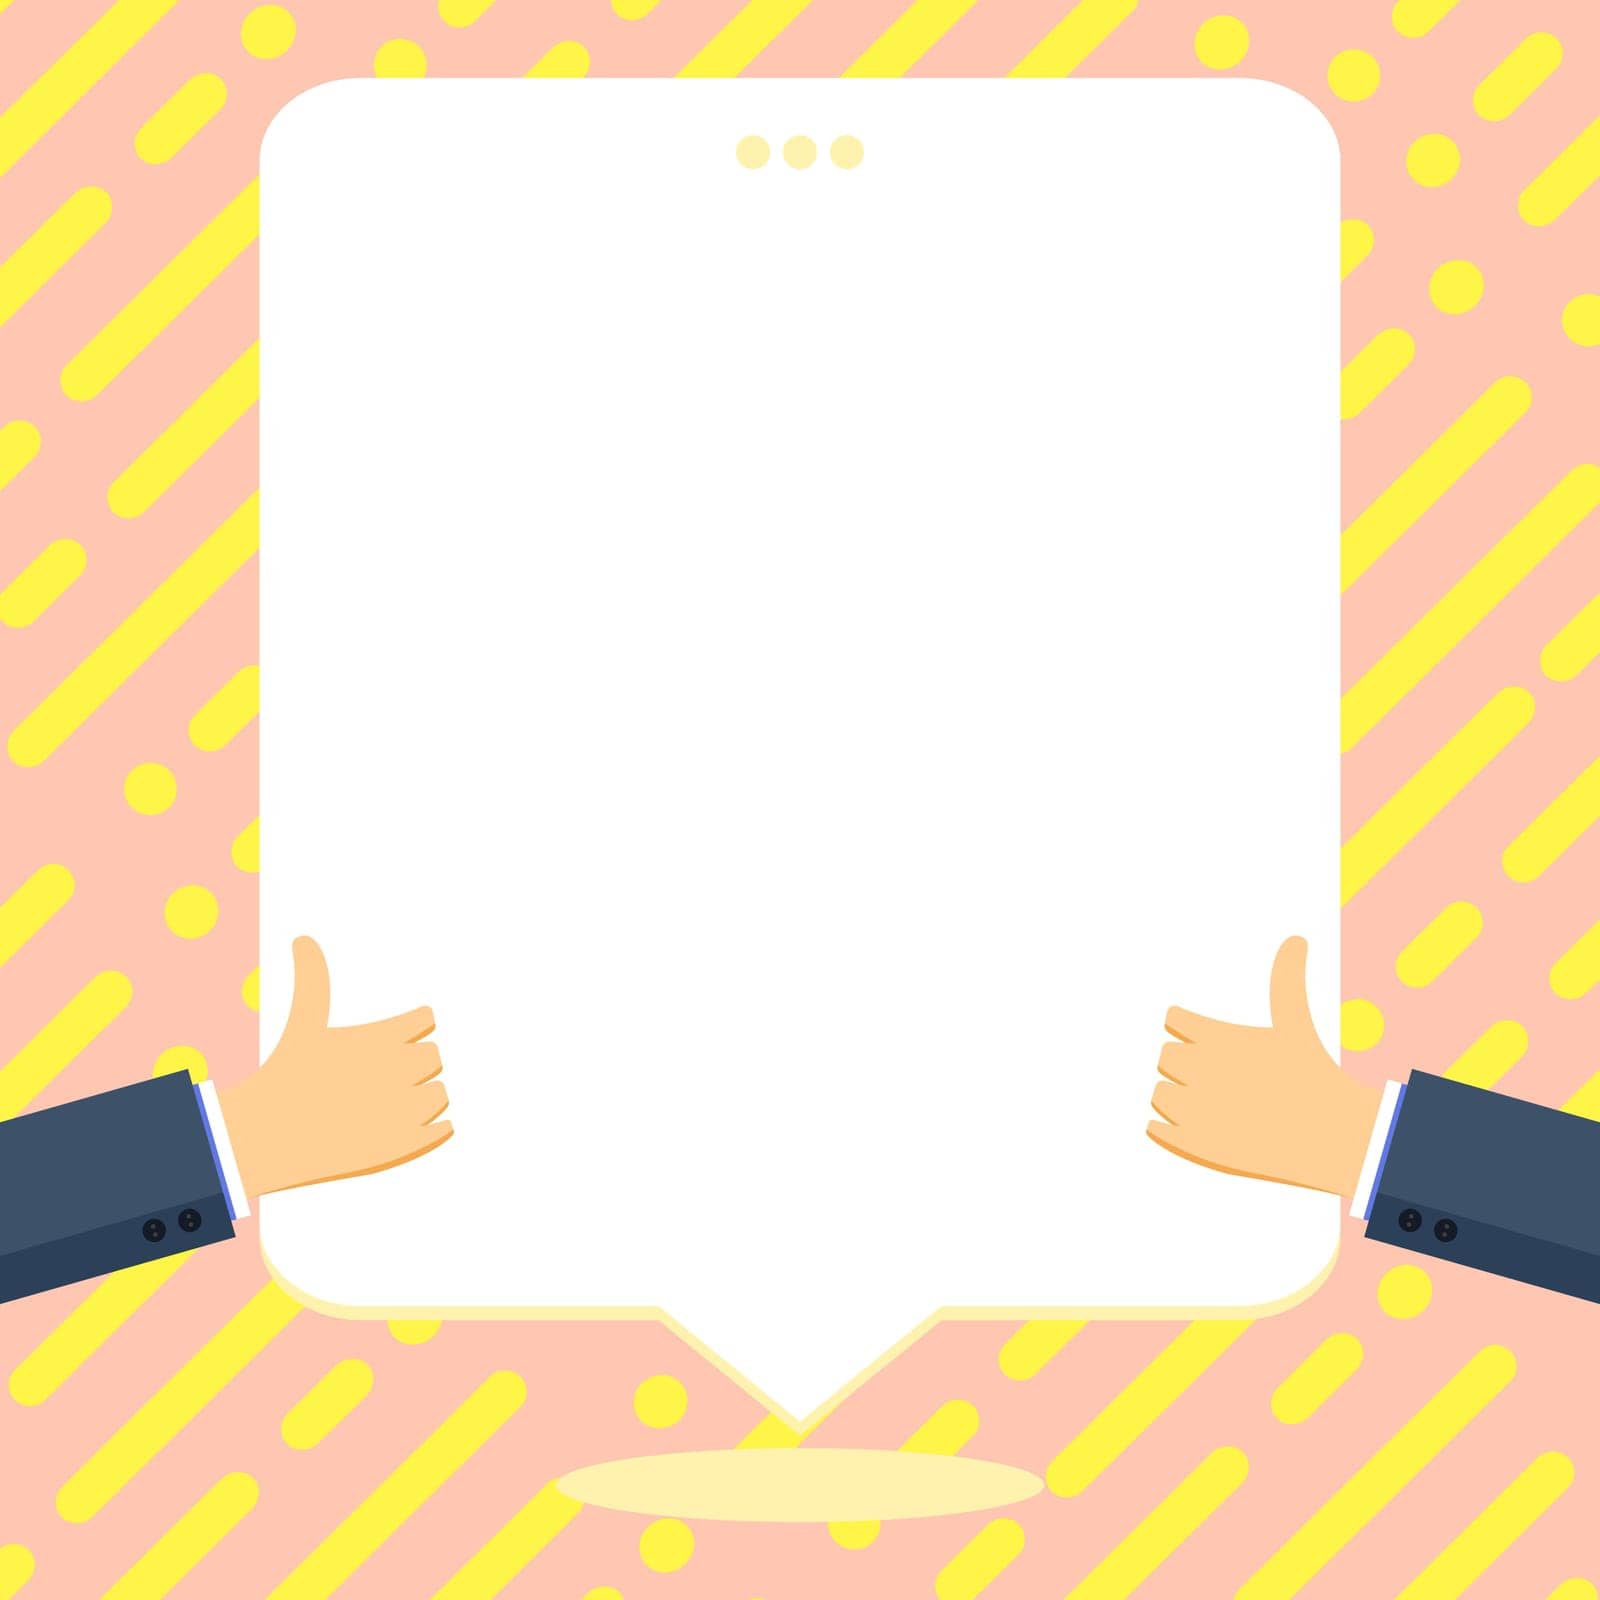 Big finger raised up pointing to whiteboard with information. White text holder behind hands contains main message. Empty speech bubble on bright colored background. by nialowwa